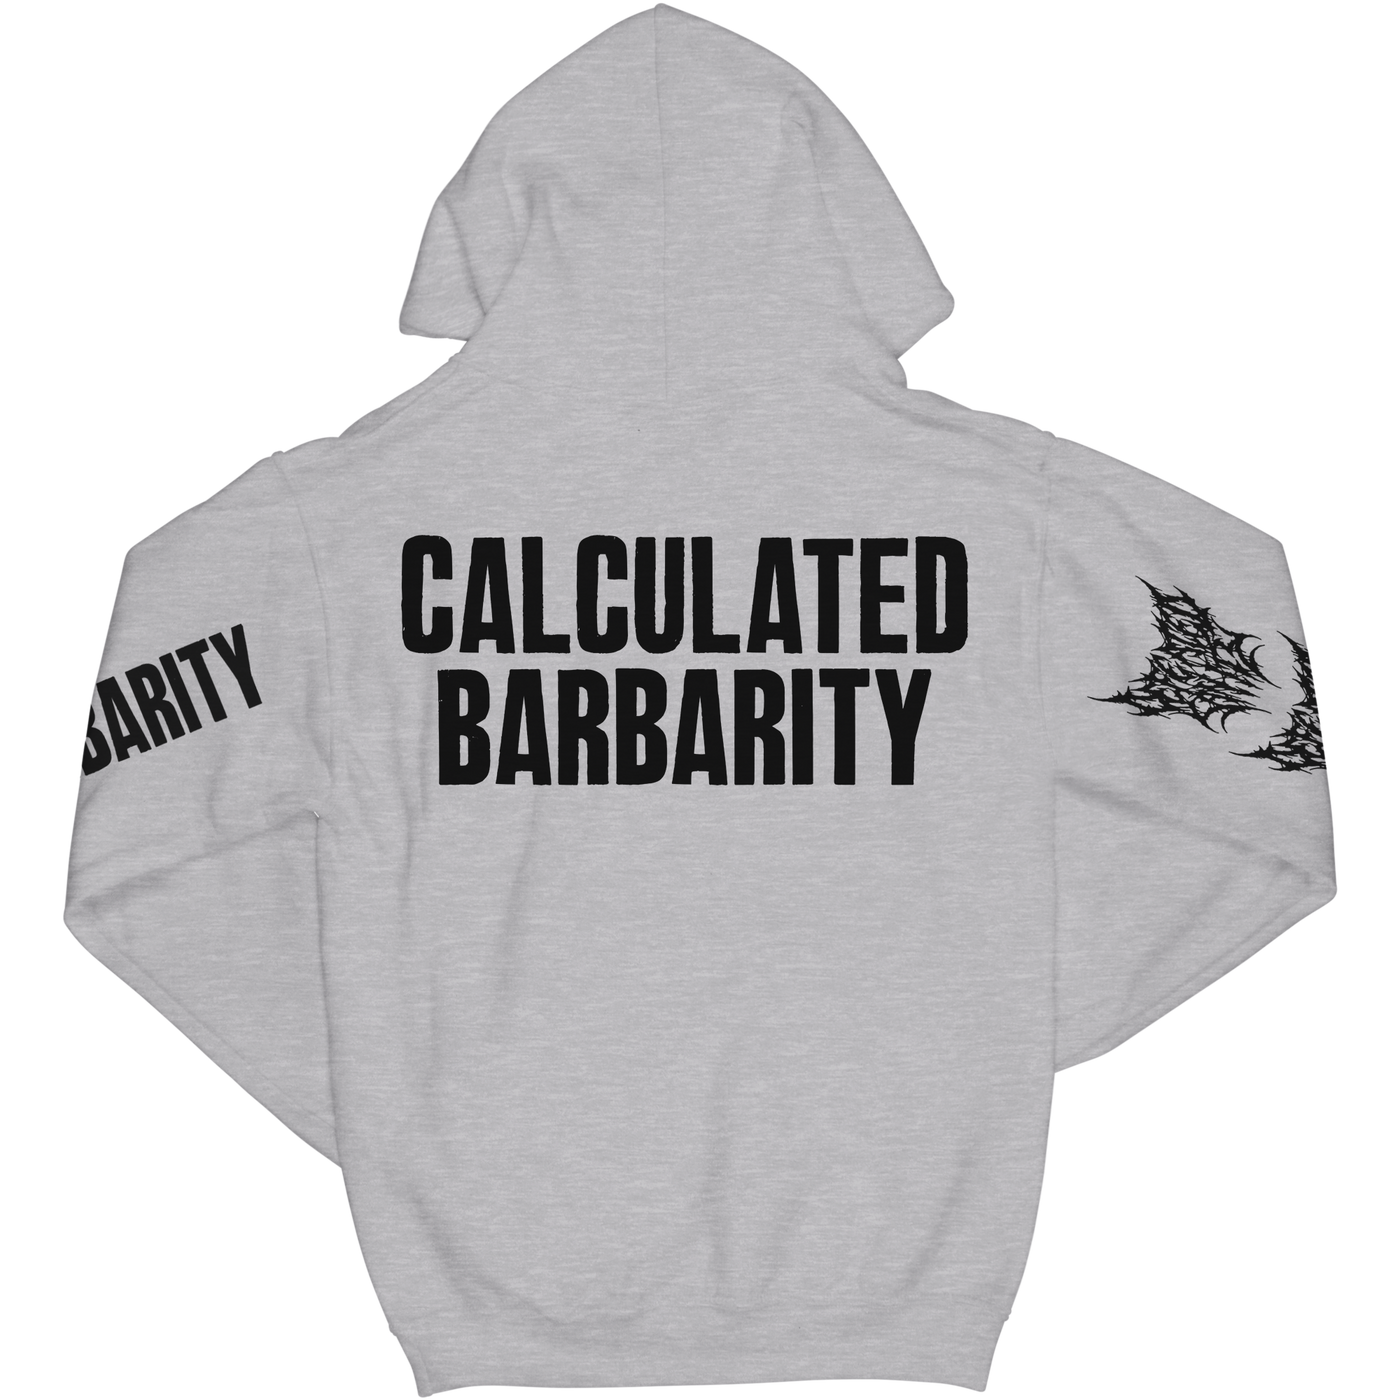 Defeated Sanity 'Calculated Barbarity' Hoodie